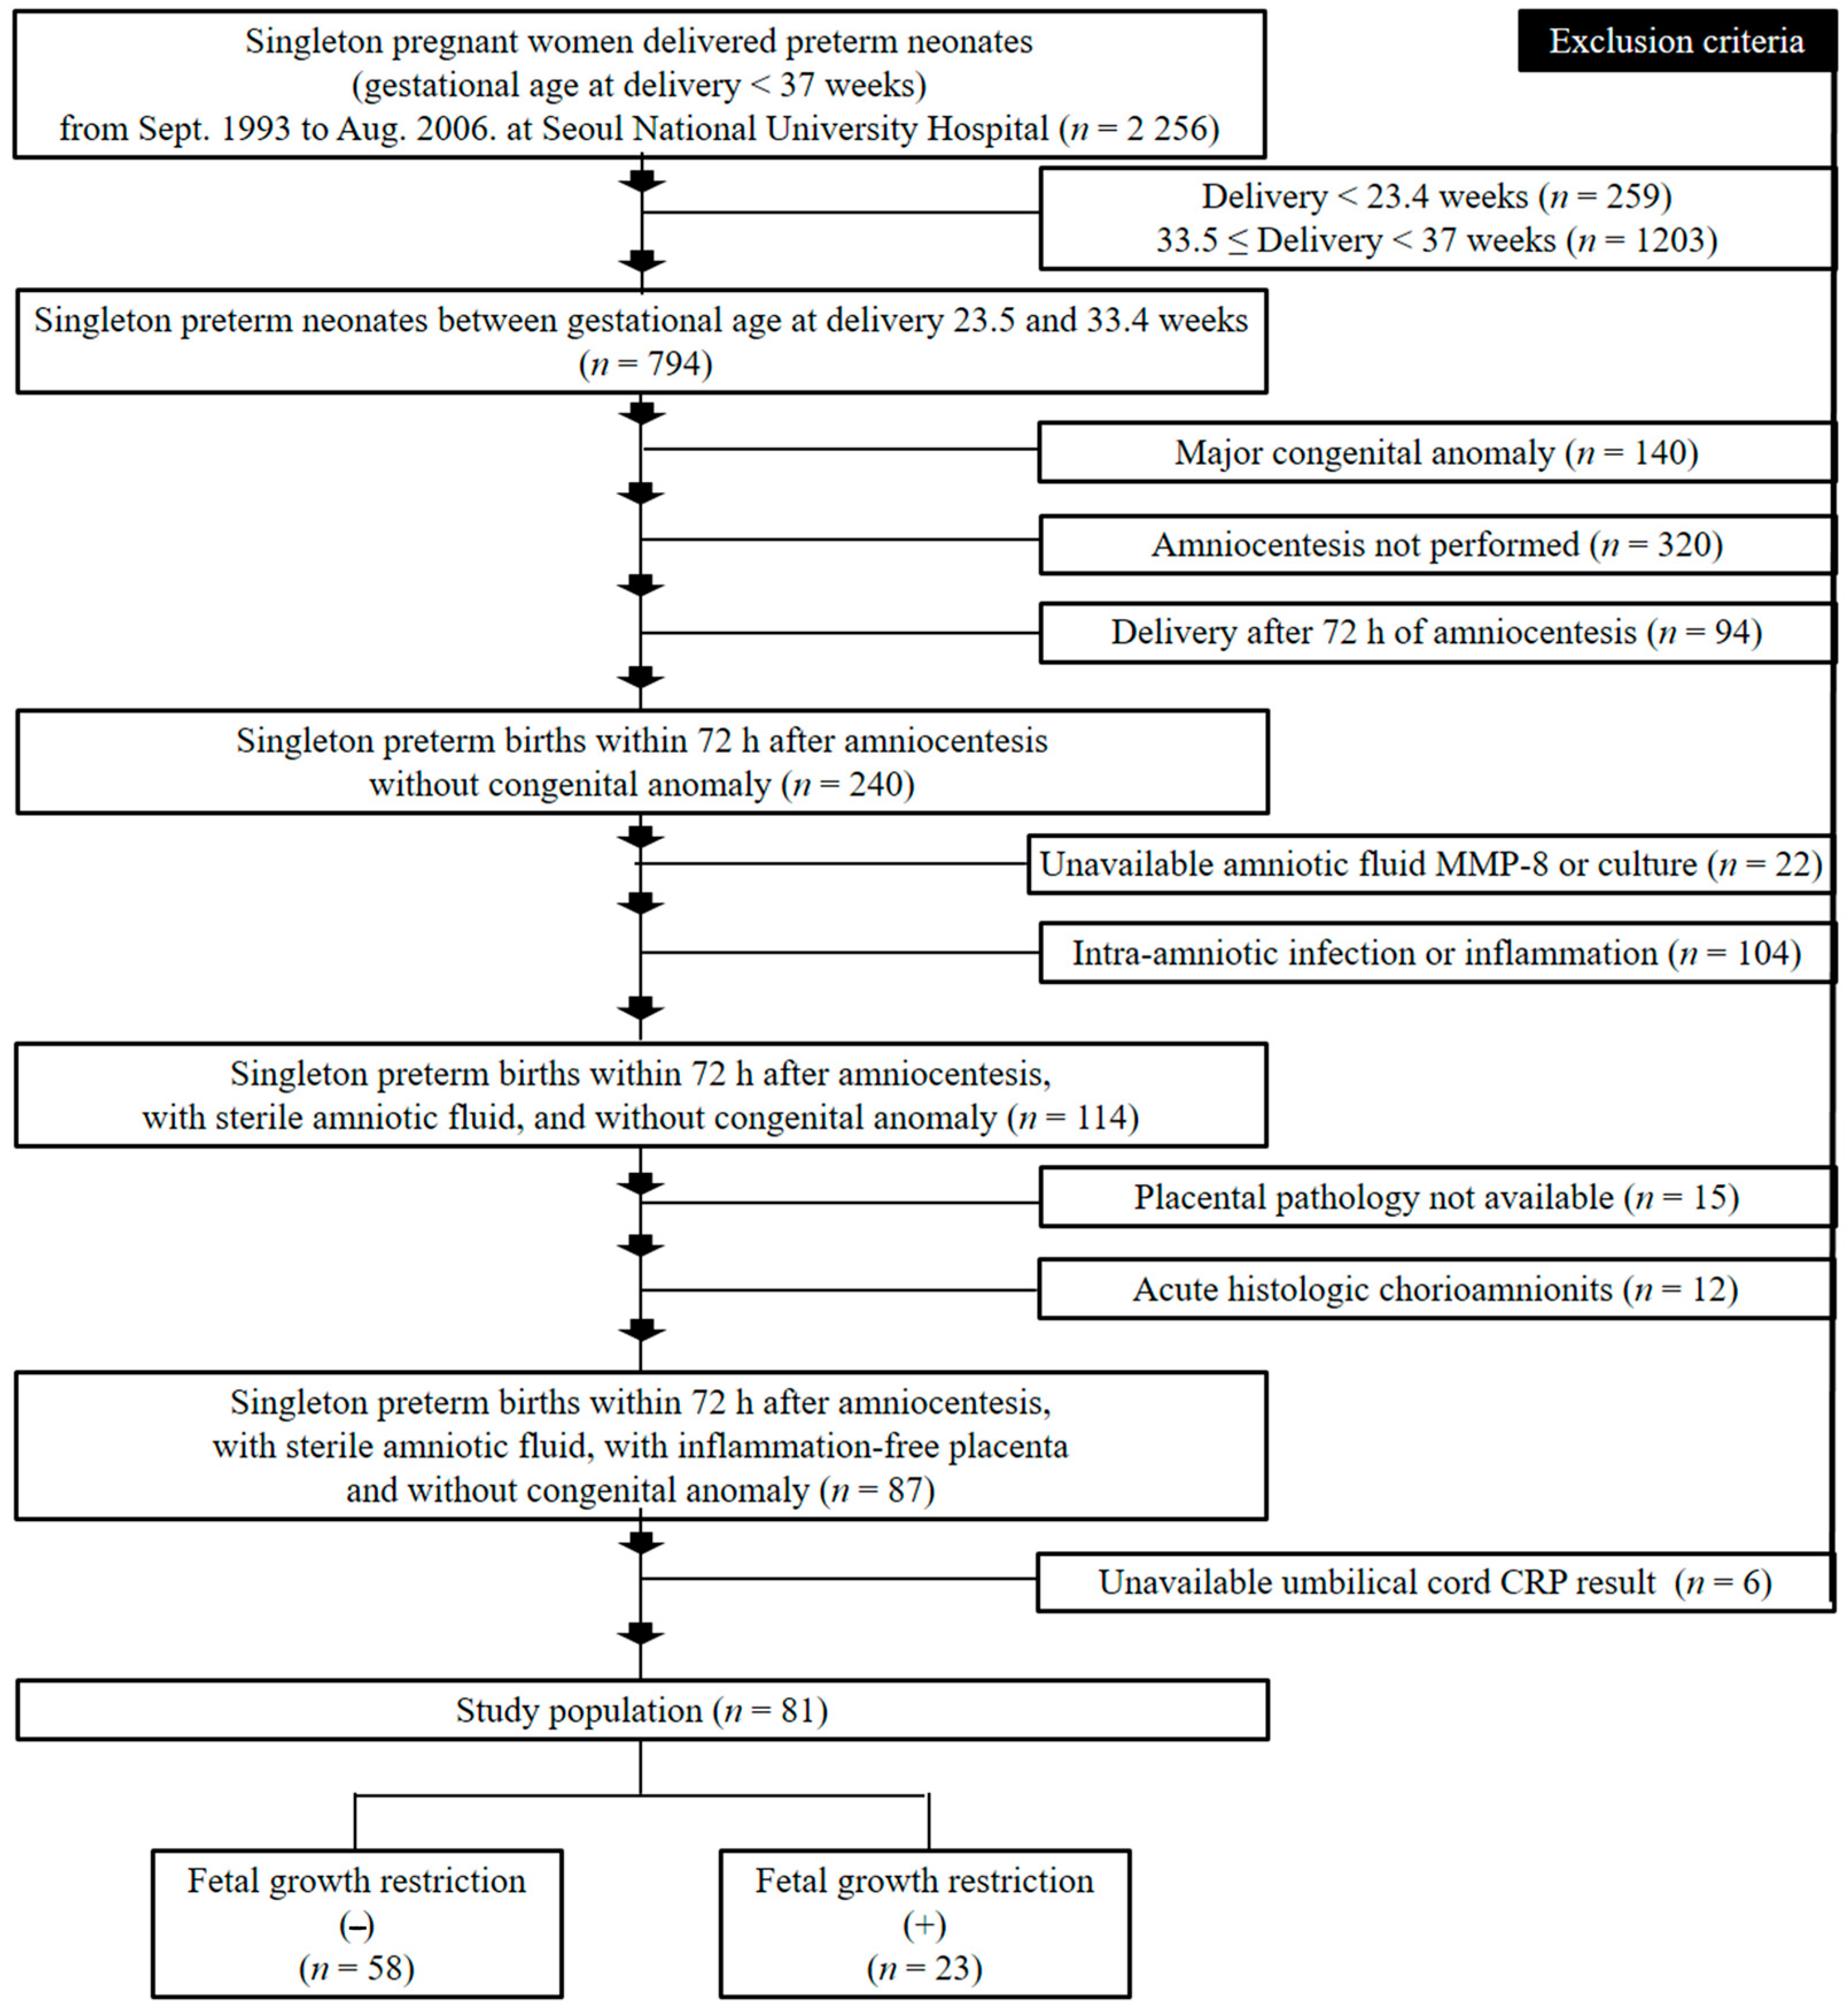 Jcm Free Full Text Fetal Growth Restriction And Subsequent Low Grade Fetal Inflammatory Response Are Associated With Early Onset Neonatal Sepsis In The Context Of Early Preterm Sterile Intrauterine Environment Html